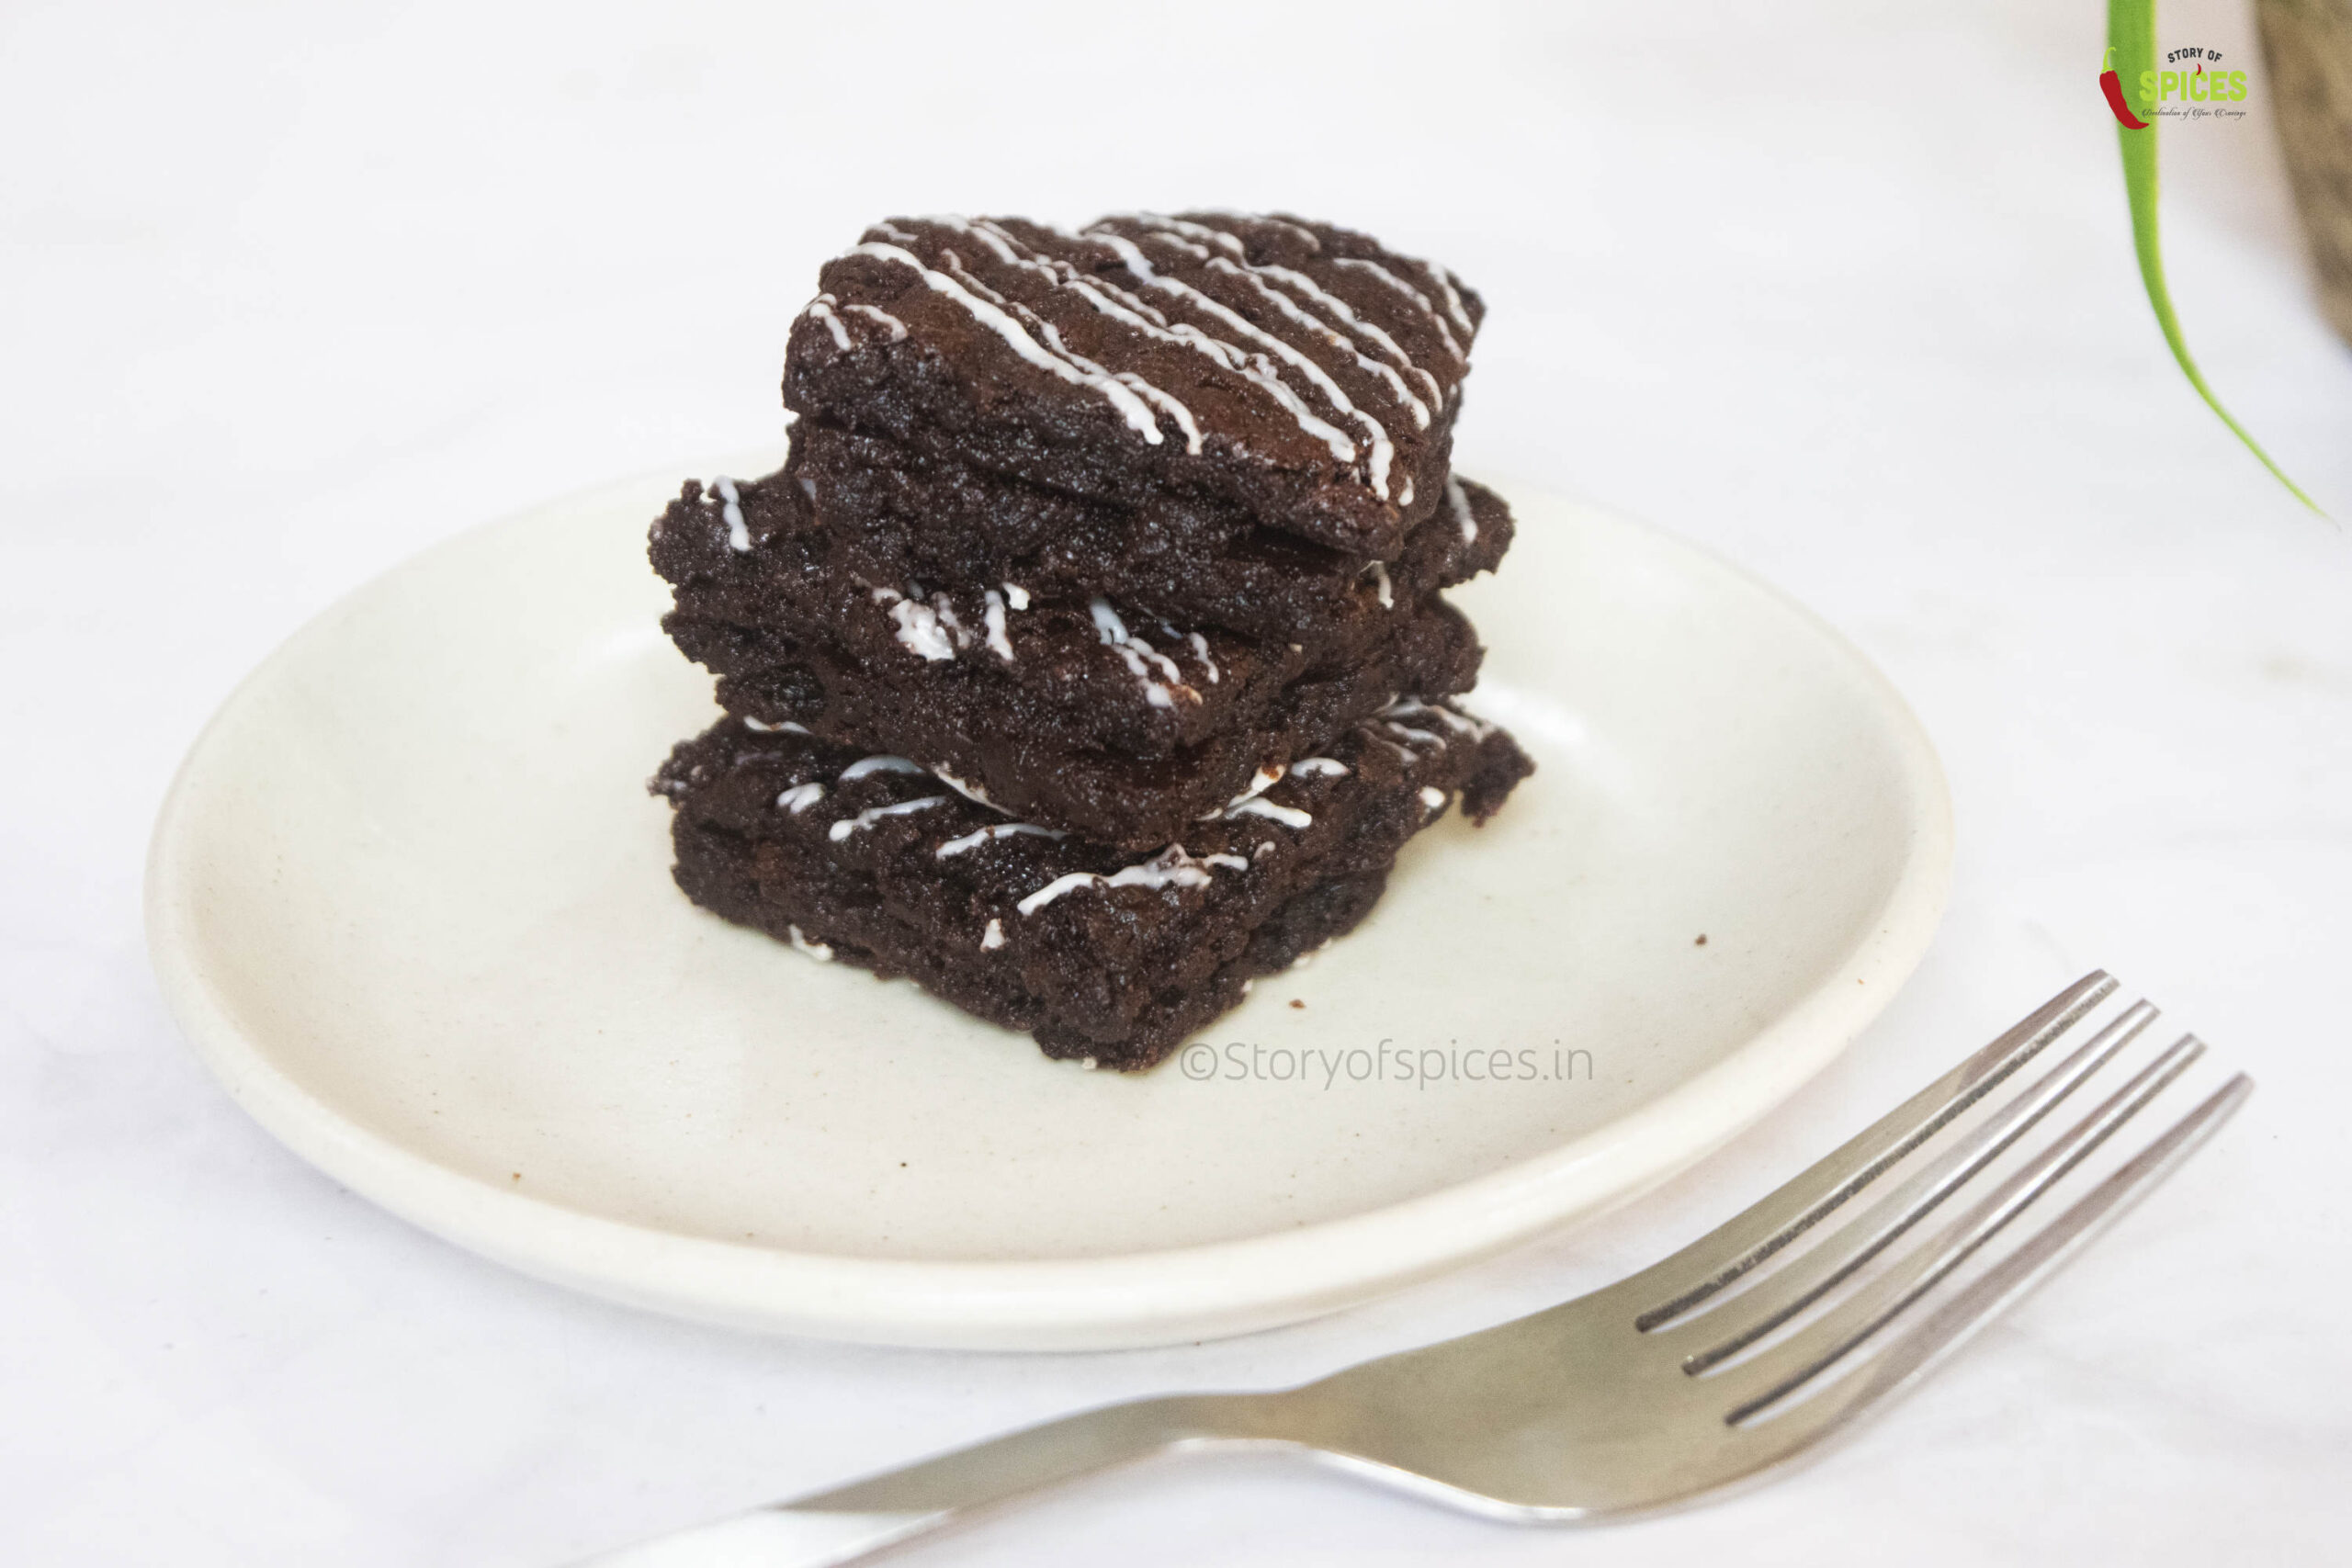 Fudgy-chocolate-Brownies-recipe-Story-of-spices